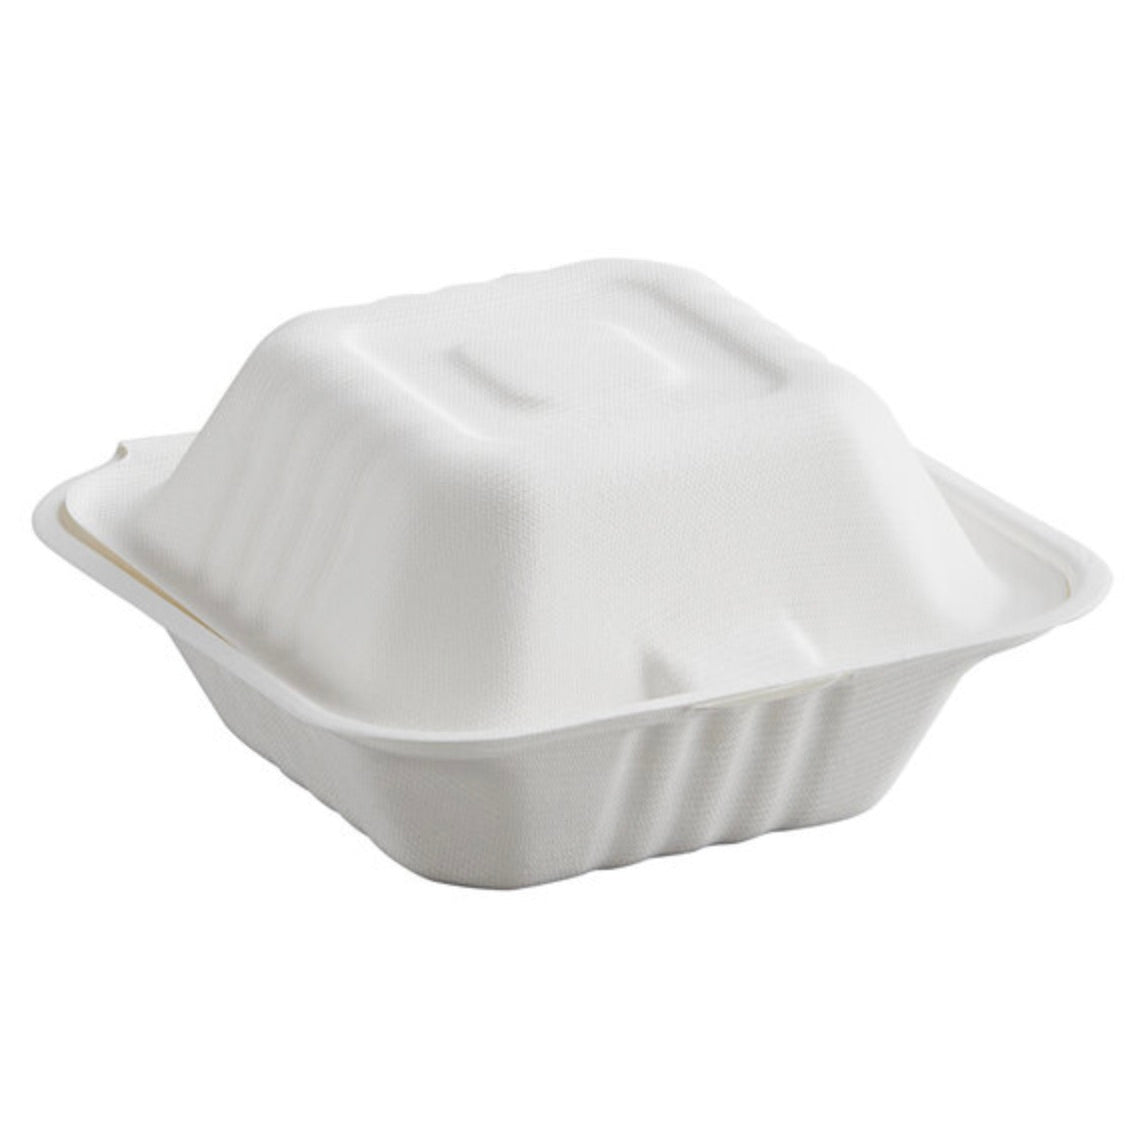 6"x6"x3" Clamshell Compostable Sugarcane / Bagasse Take-Out Container - 500/Case